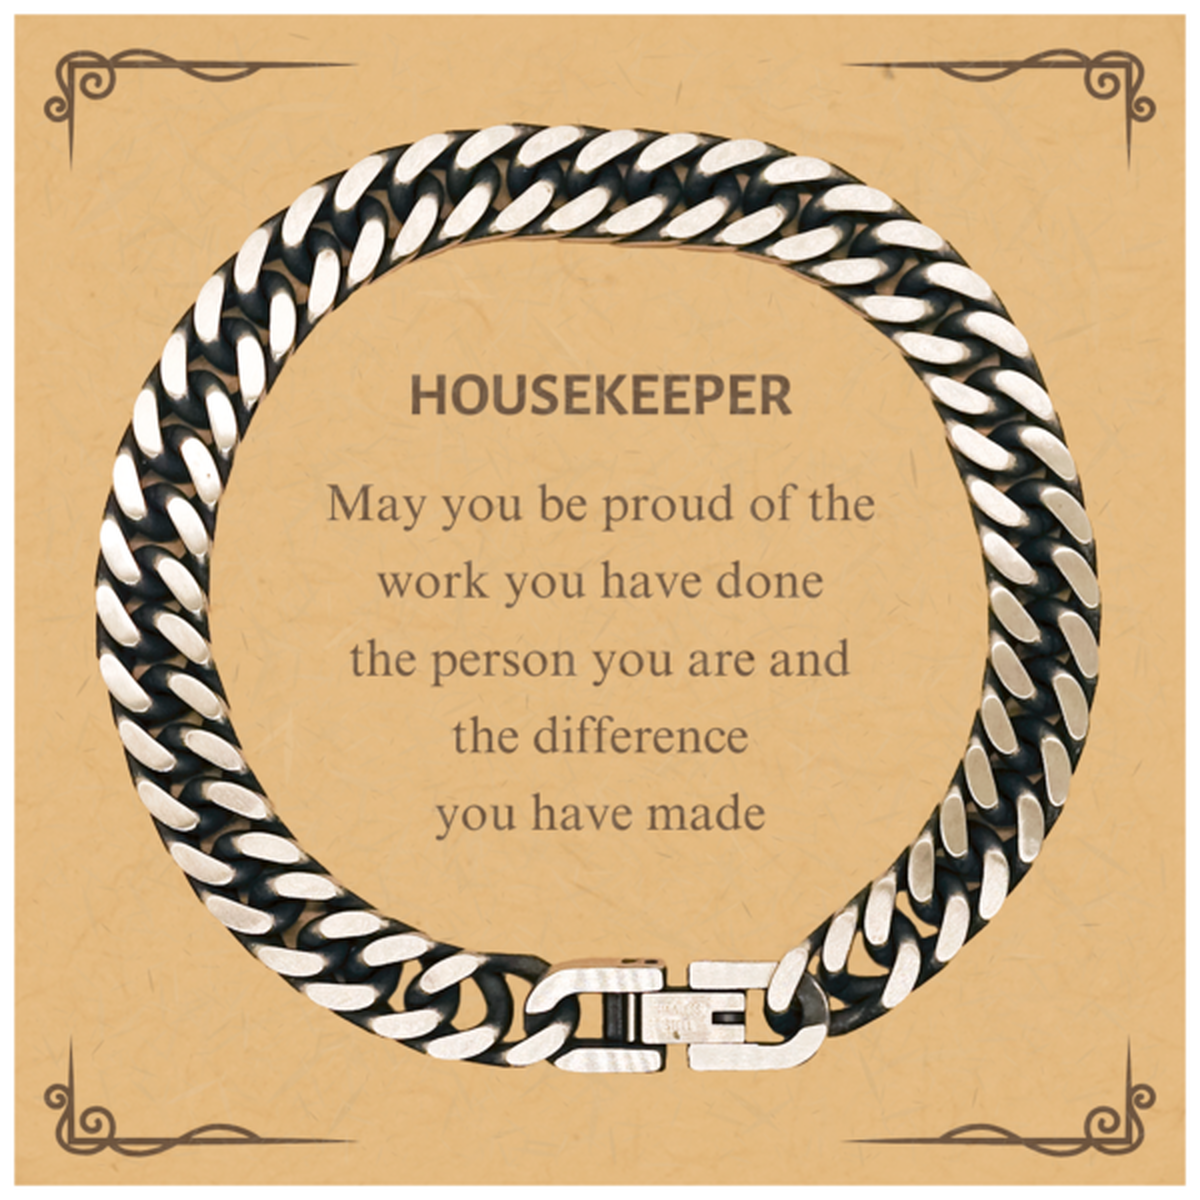 Housekeeper May you be proud of the work you have done, Retirement Housekeeper Cuban Link Chain Bracelet for Colleague Appreciation Gifts Amazing for Housekeeper